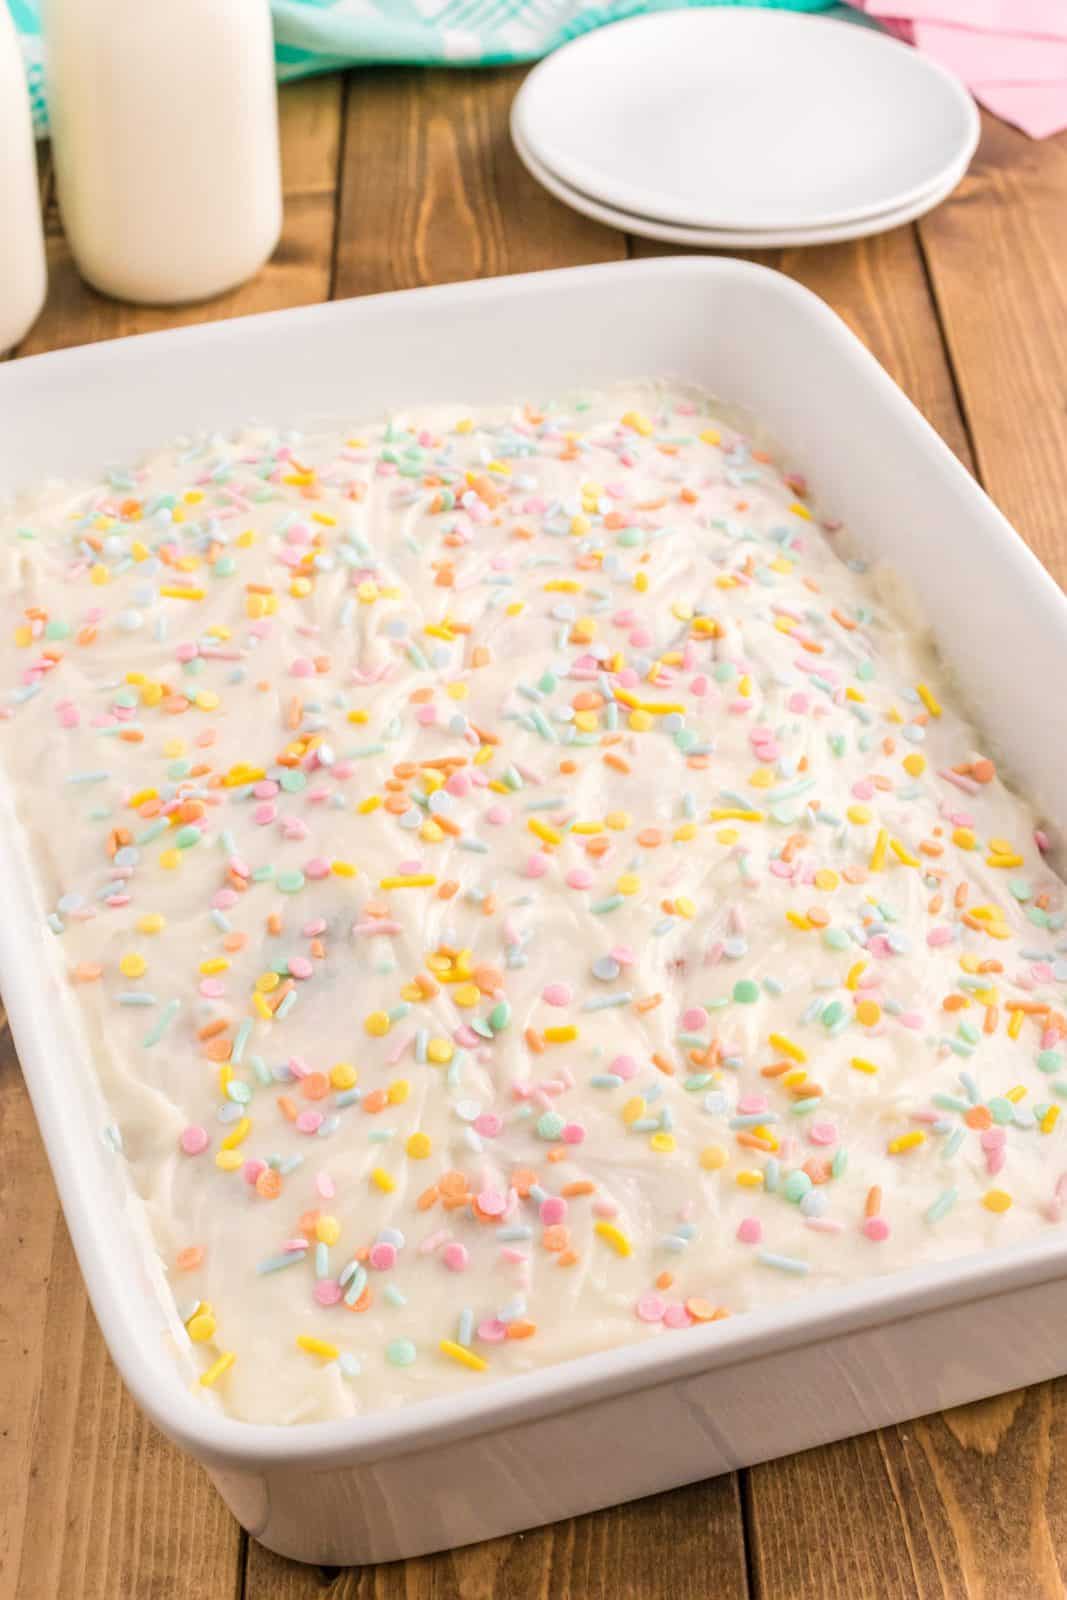 Sprinkles added to frosted cake.